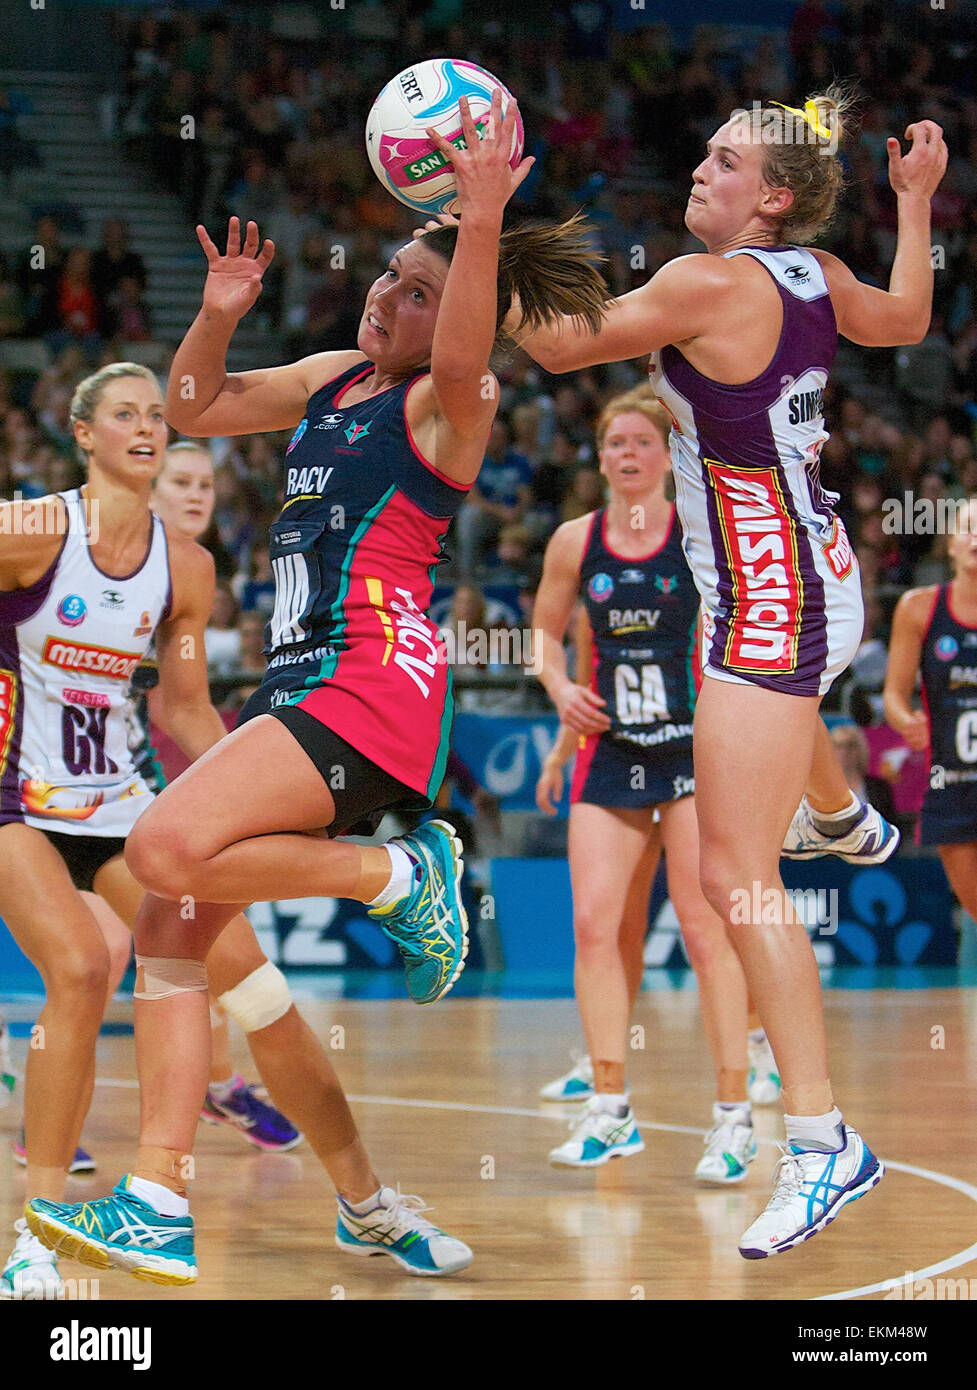 Melbourne, Victoria, Australia. 12th Apr, 2015. Vixen and Firebird players compete for the ball during the 2015 ANZ Championship Netball game between the Melbourne Vixens and the QLD Firebirds at Hisense Arena. The QLD Firebirds beat the Melbourne Vixens 55-48 Credit:  Tom Griffiths/ZUMA Wire/Alamy Live News Stock Photo